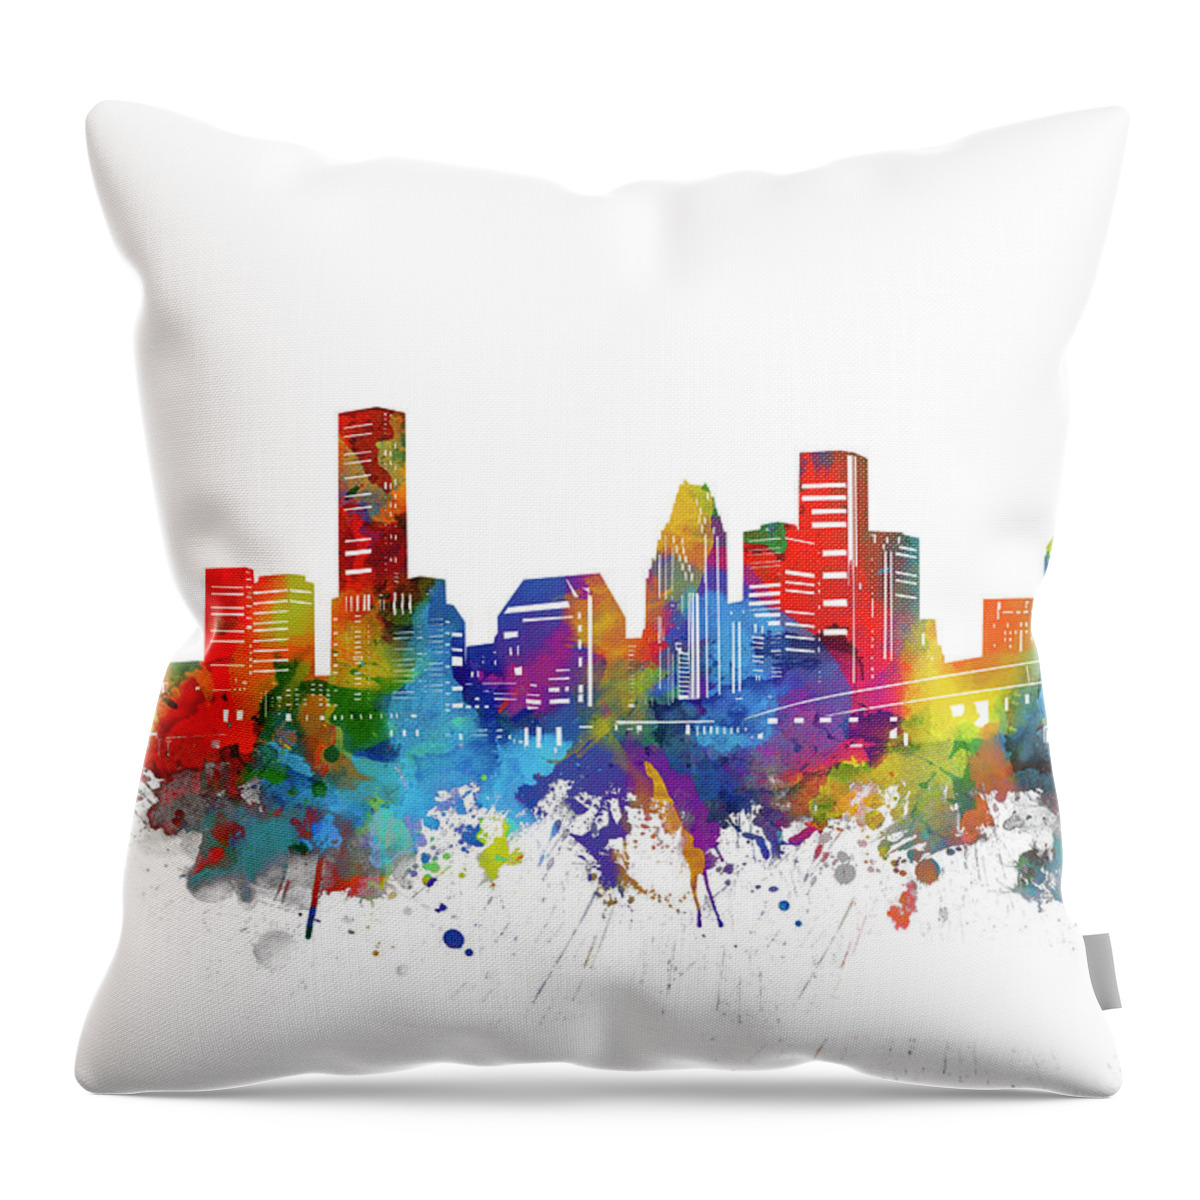 Houston Throw Pillow featuring the digital art Houston City Skyline Watercolor by Bekim M